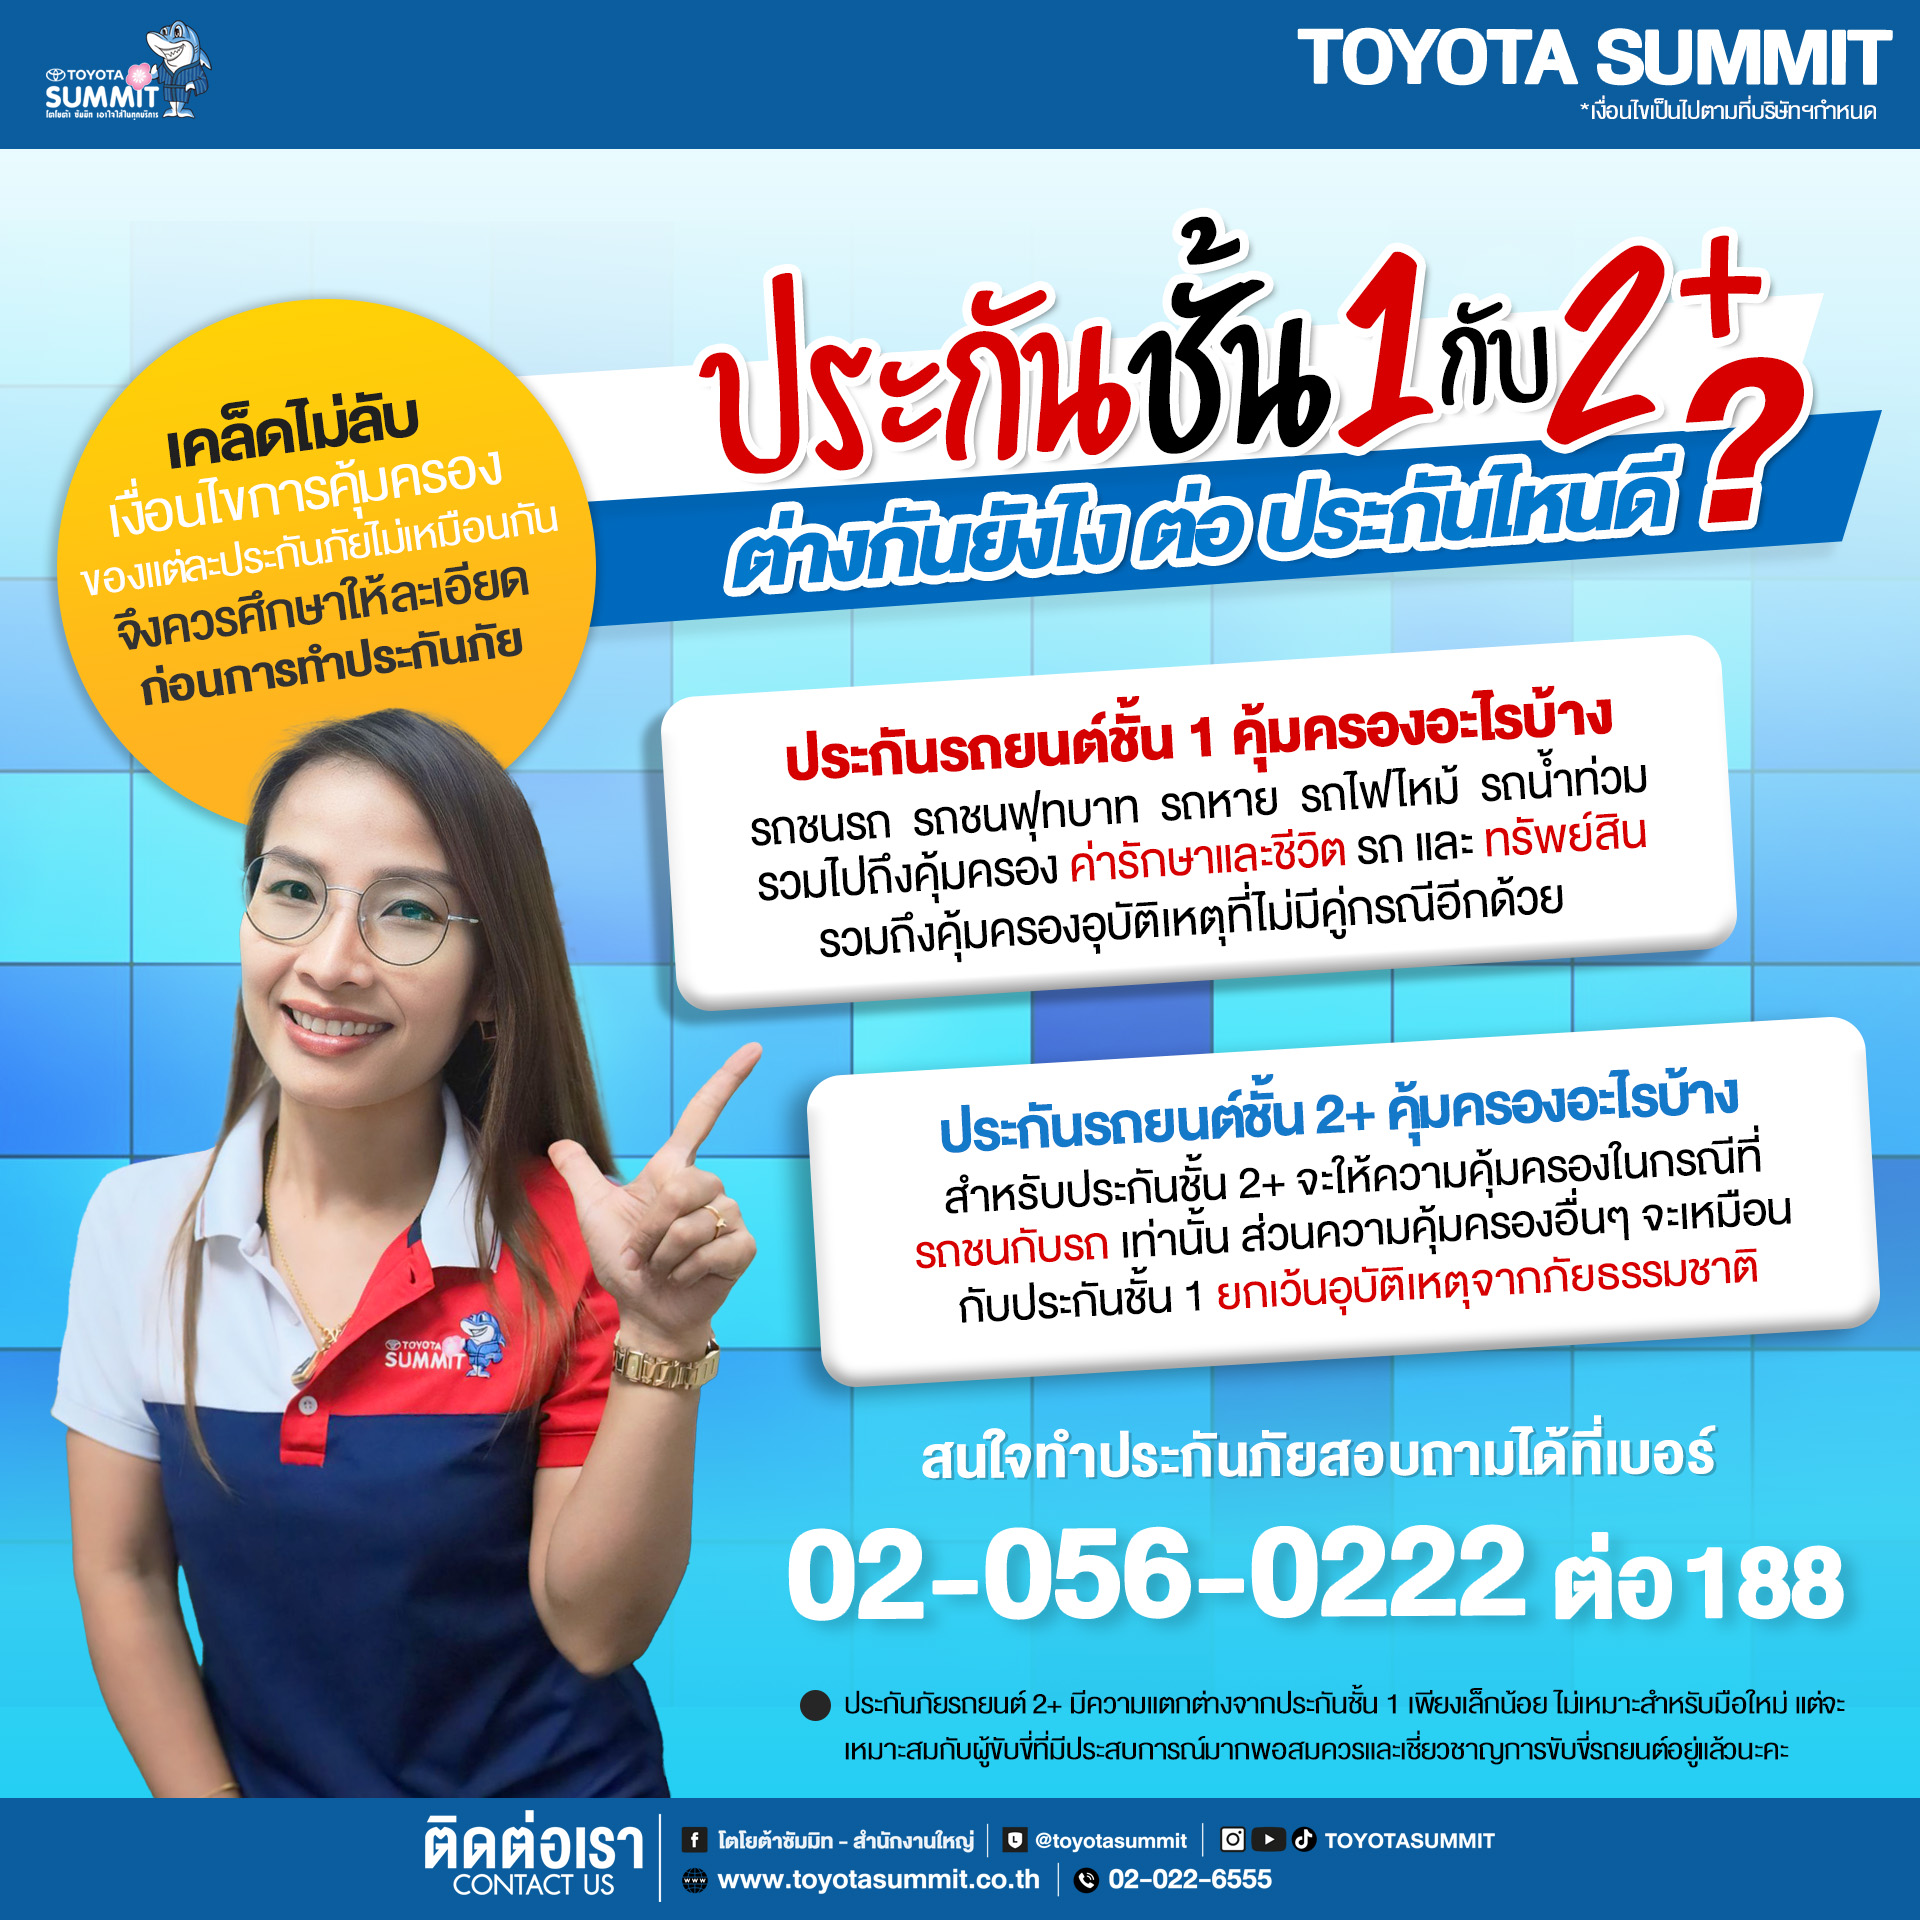 About Toyota Care